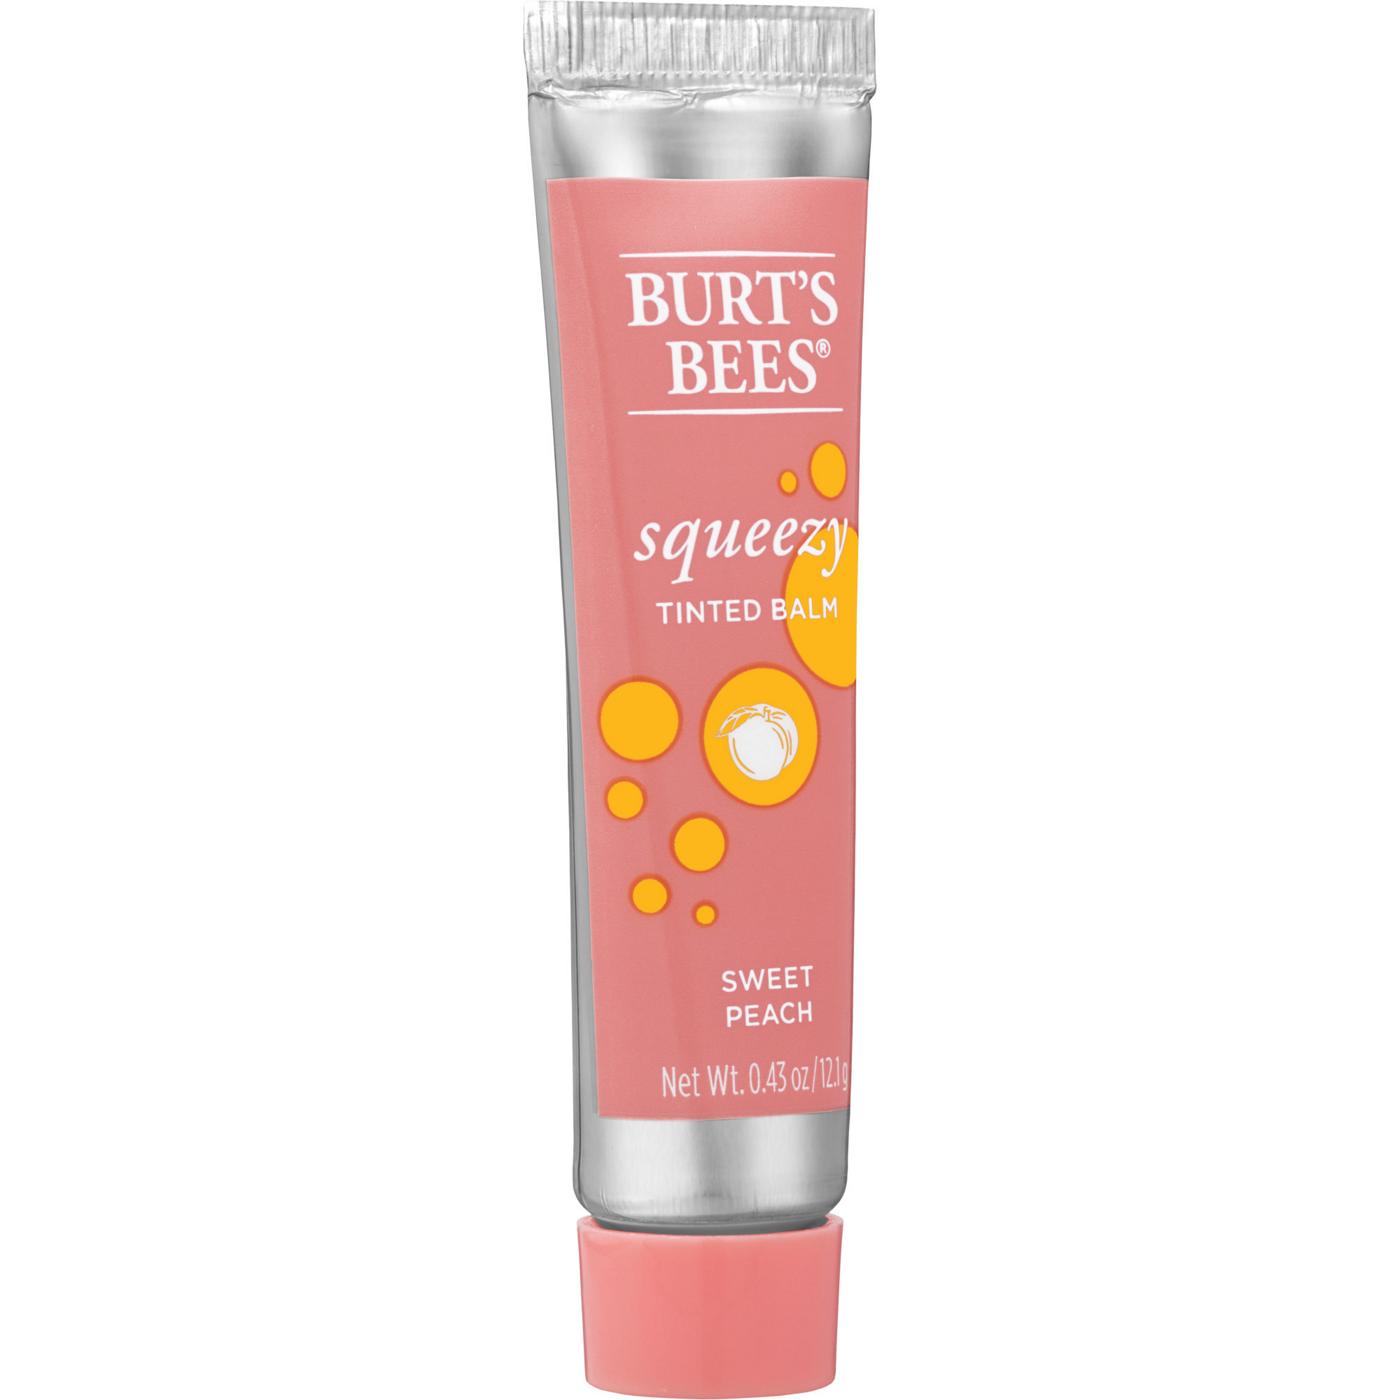 Burt's Bees Squeezy Tinted Lip Balm - Sweet Peach; image 5 of 12